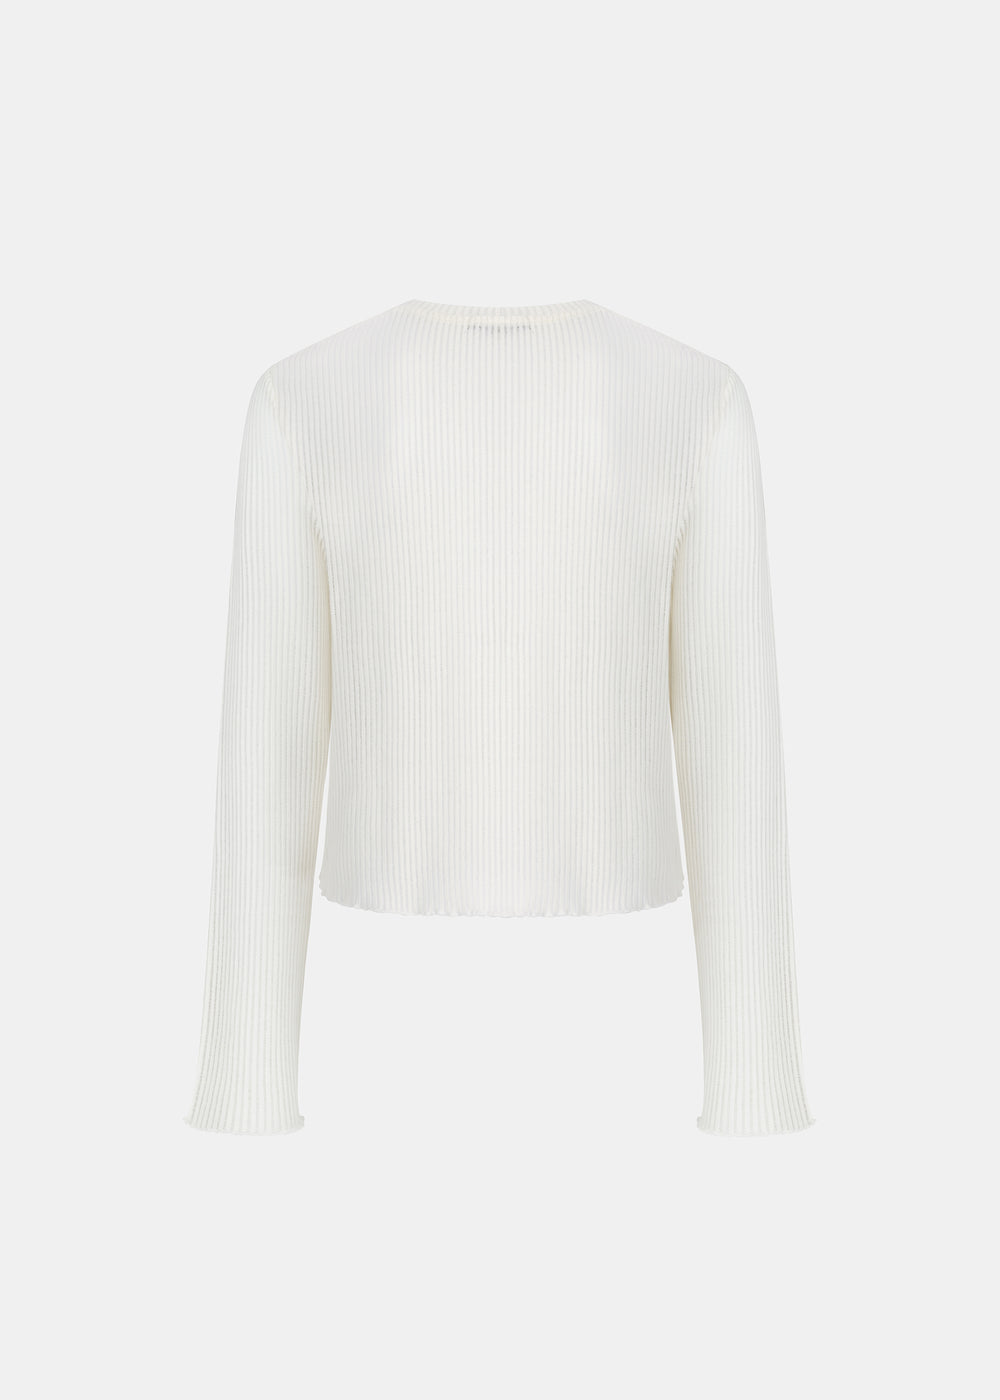 HAUT MANCHES LONGUES ESSENTIAL OFF WHITE